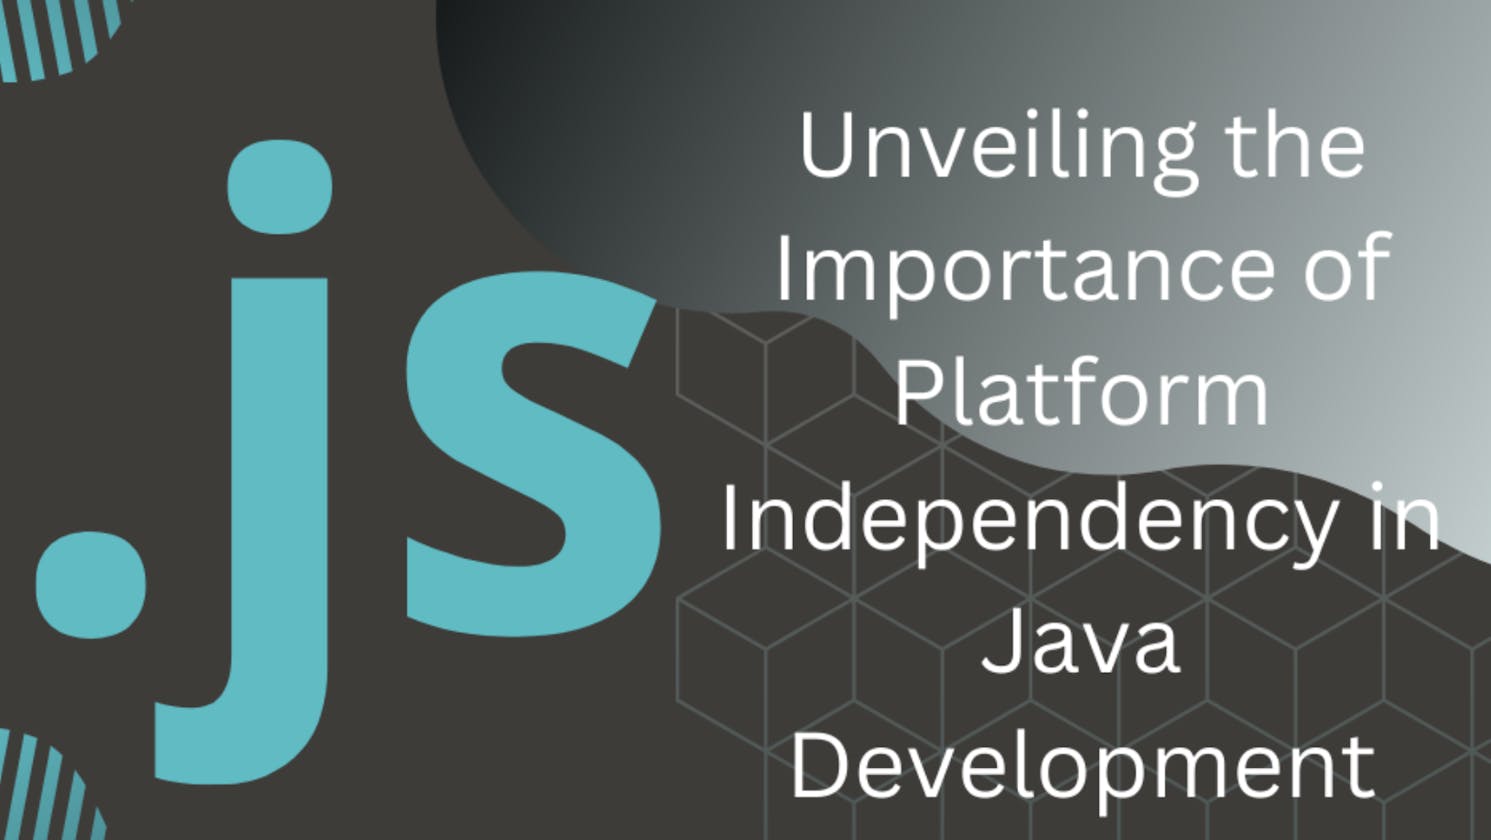 Unveiling the Importance of Platform Independency in Java Development